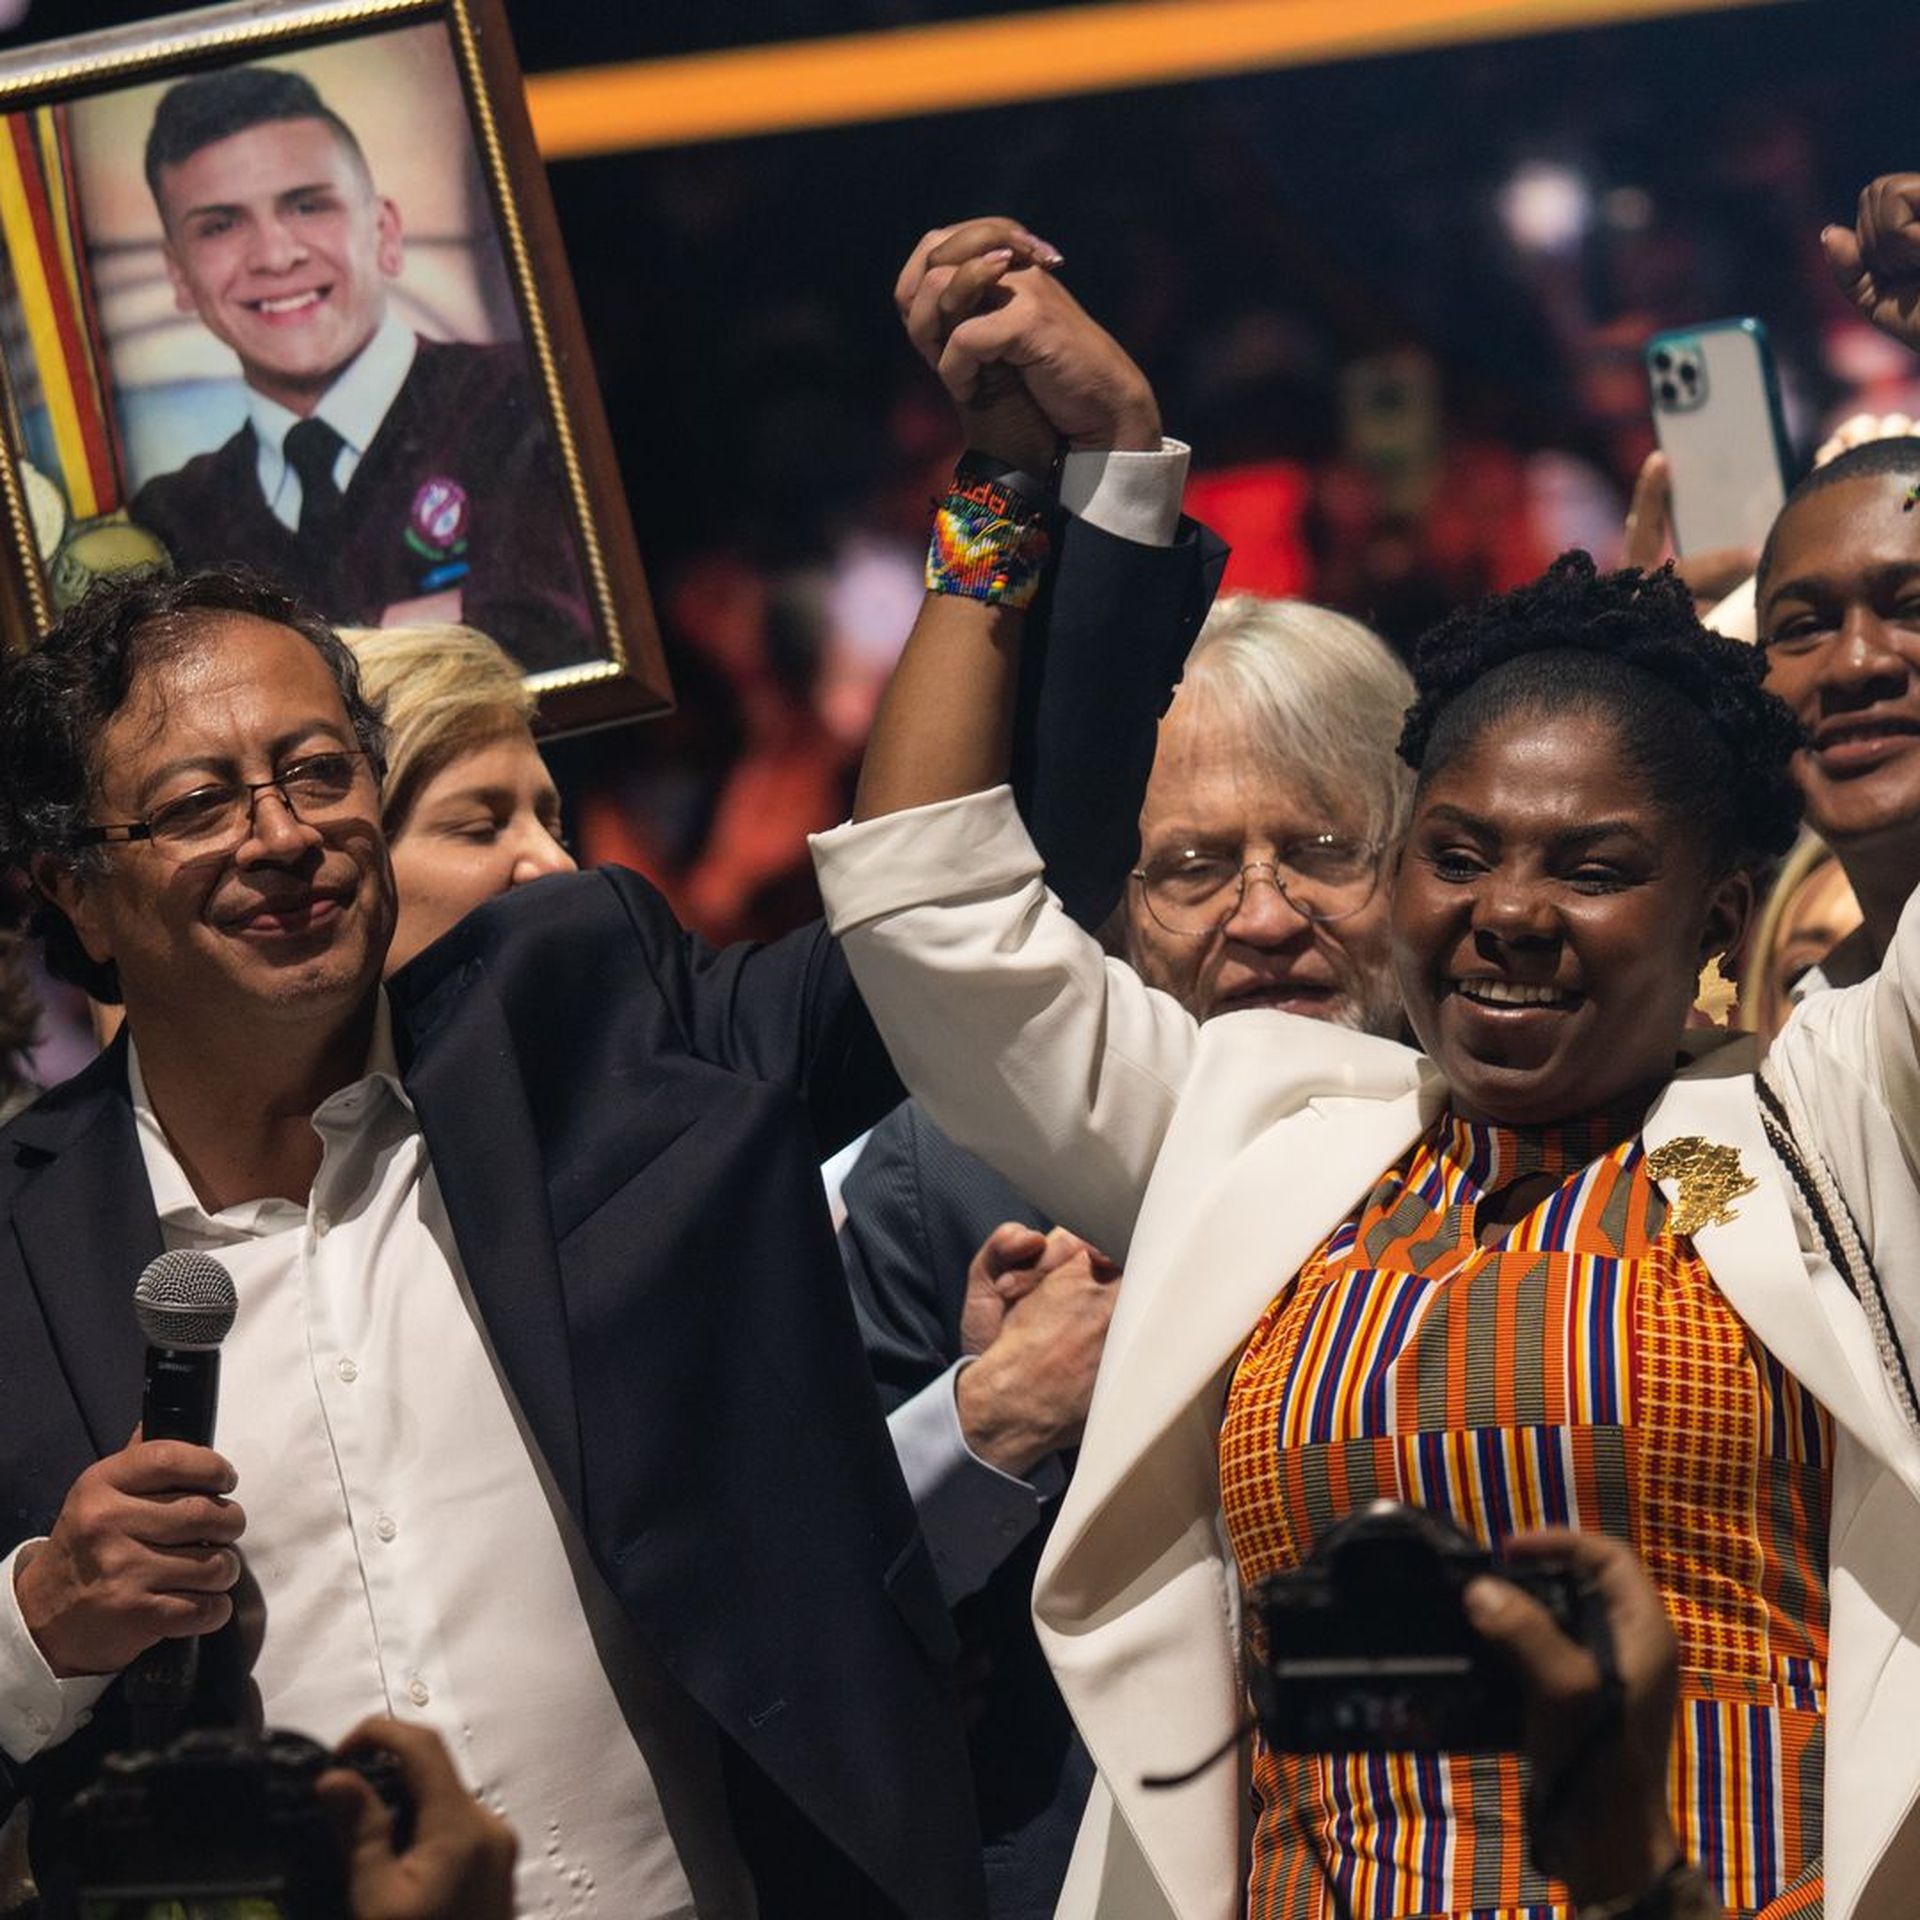 Gustavo Petro and Francia Márquez celebrate their victory in Colombia's presidential election on June 19. Photo: Andrés Cardona/Bloomberg via Getty Images